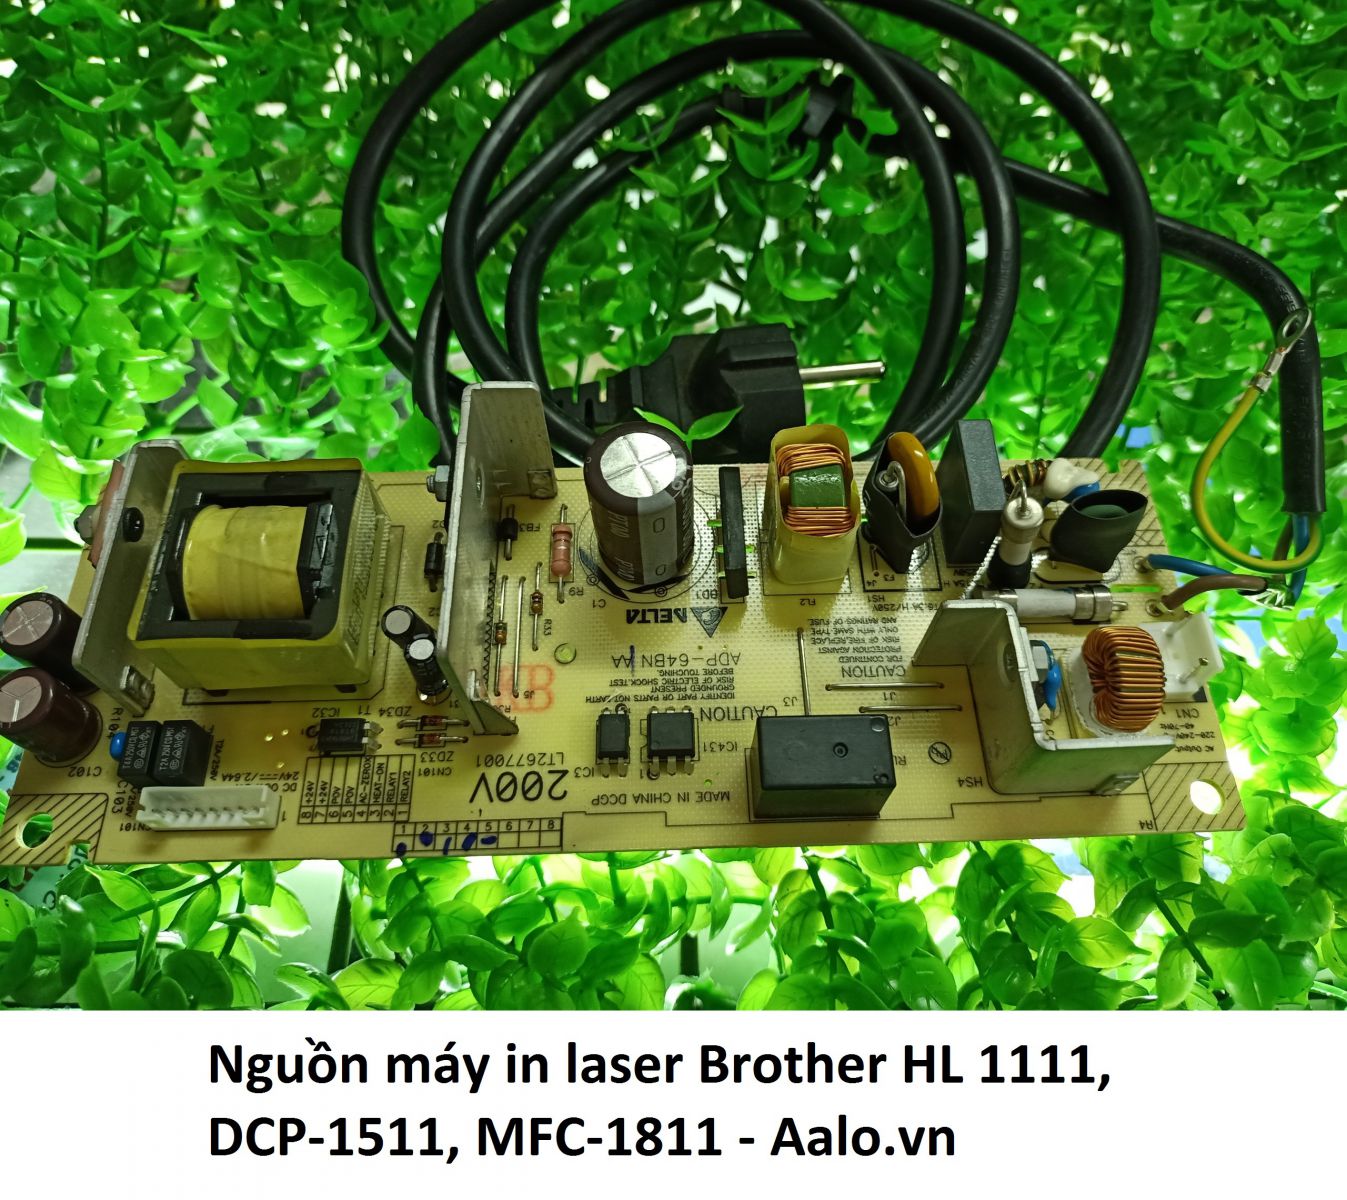 Nguồn máy in laser Brother HL 1111, DCP-1511, MFC-1811 - Aalo.vn